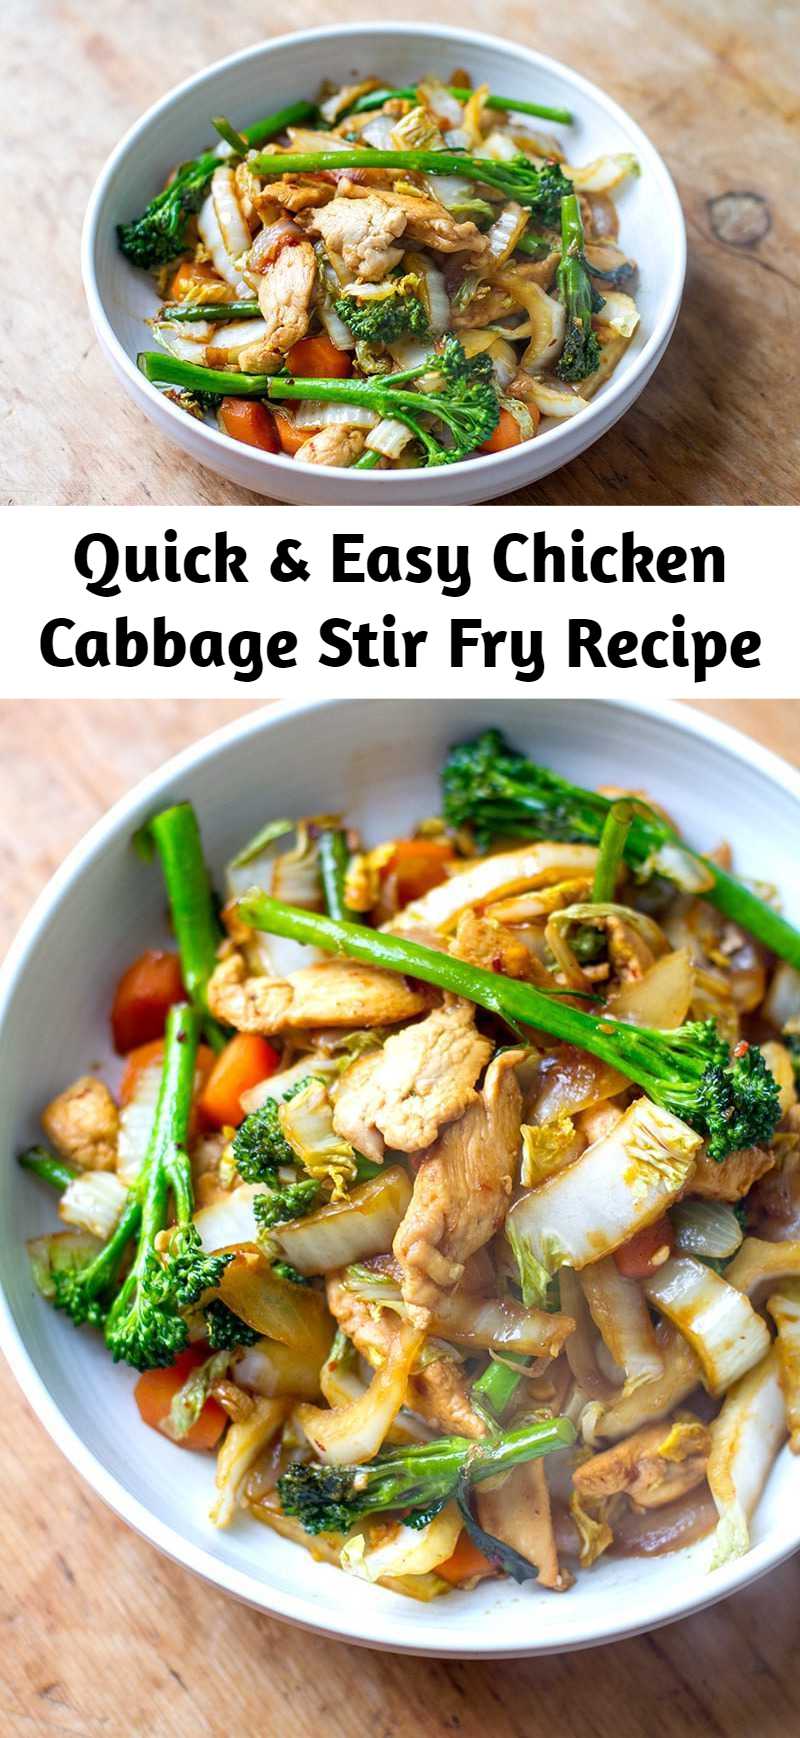 Quick & Easy Chicken Cabbage Stir Fry Recipe - This quick and easy chicken cabbage stir-fry is a great weeknight meal. It’s healthy, nutritious, gluten-free, paleo, low-carb and Whole30 friendly.